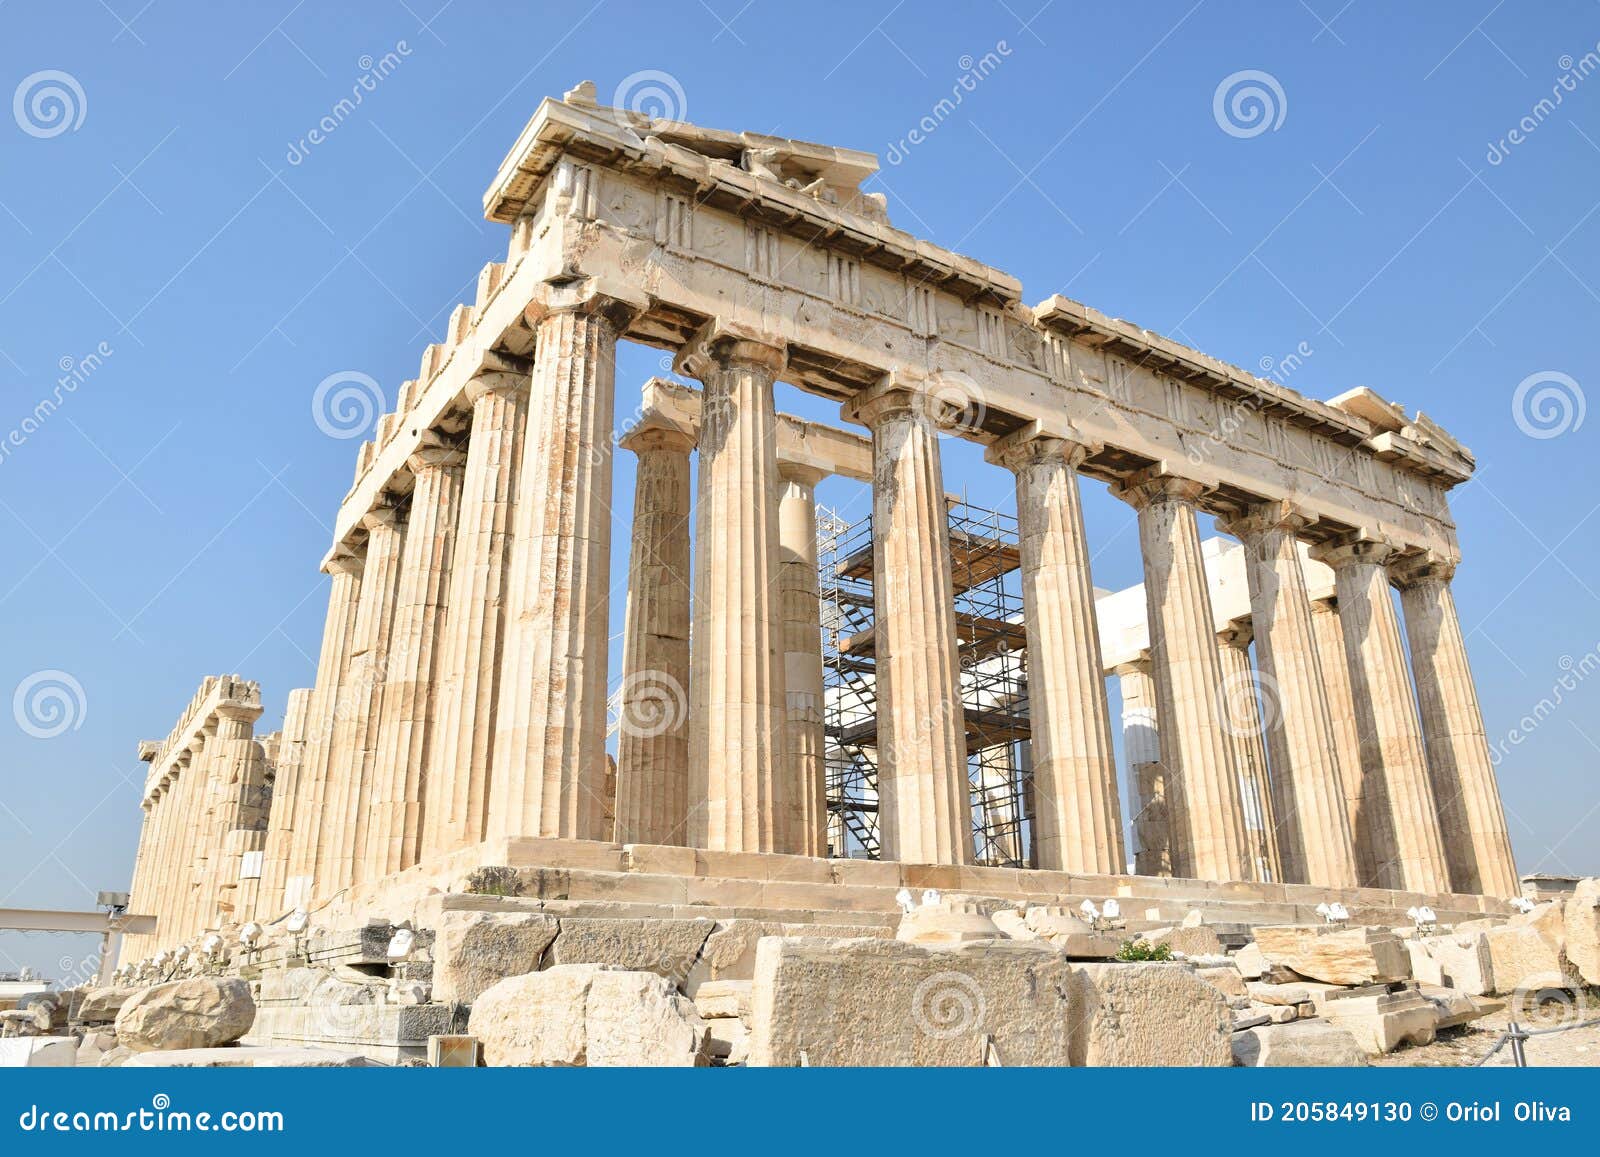 view of the main monuments and sites of athens (greece). acropolis. the parthenon.